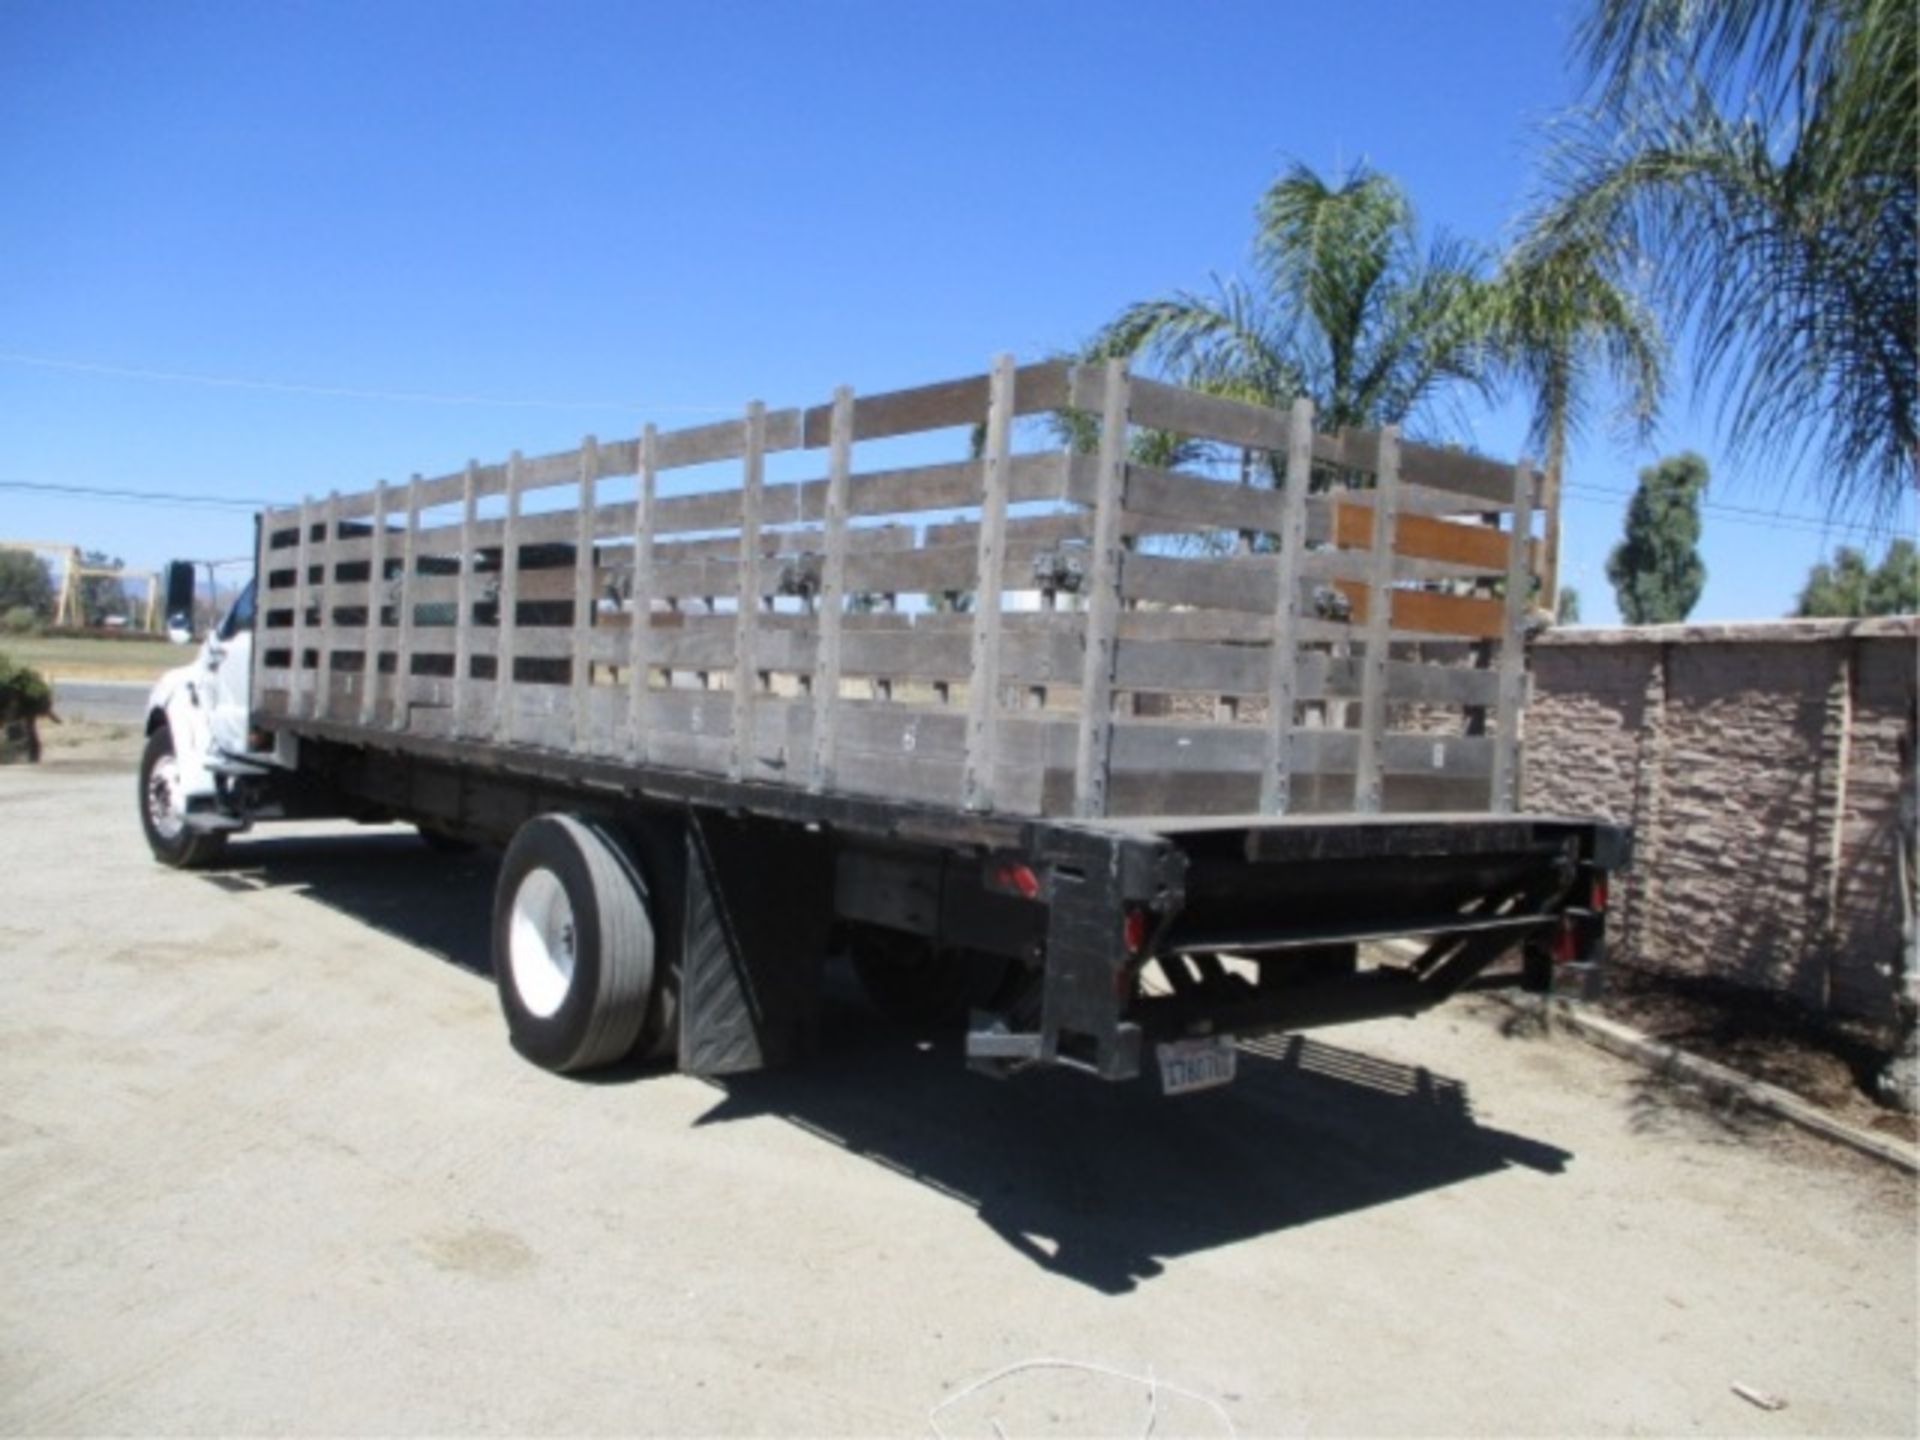 2005 Ford F650 S/A Flatbed Stakebed Truck, Cat C7 Acert 7.2L 6-Cyl Diesel, Automatic, Lift Gate, 24' - Image 21 of 61